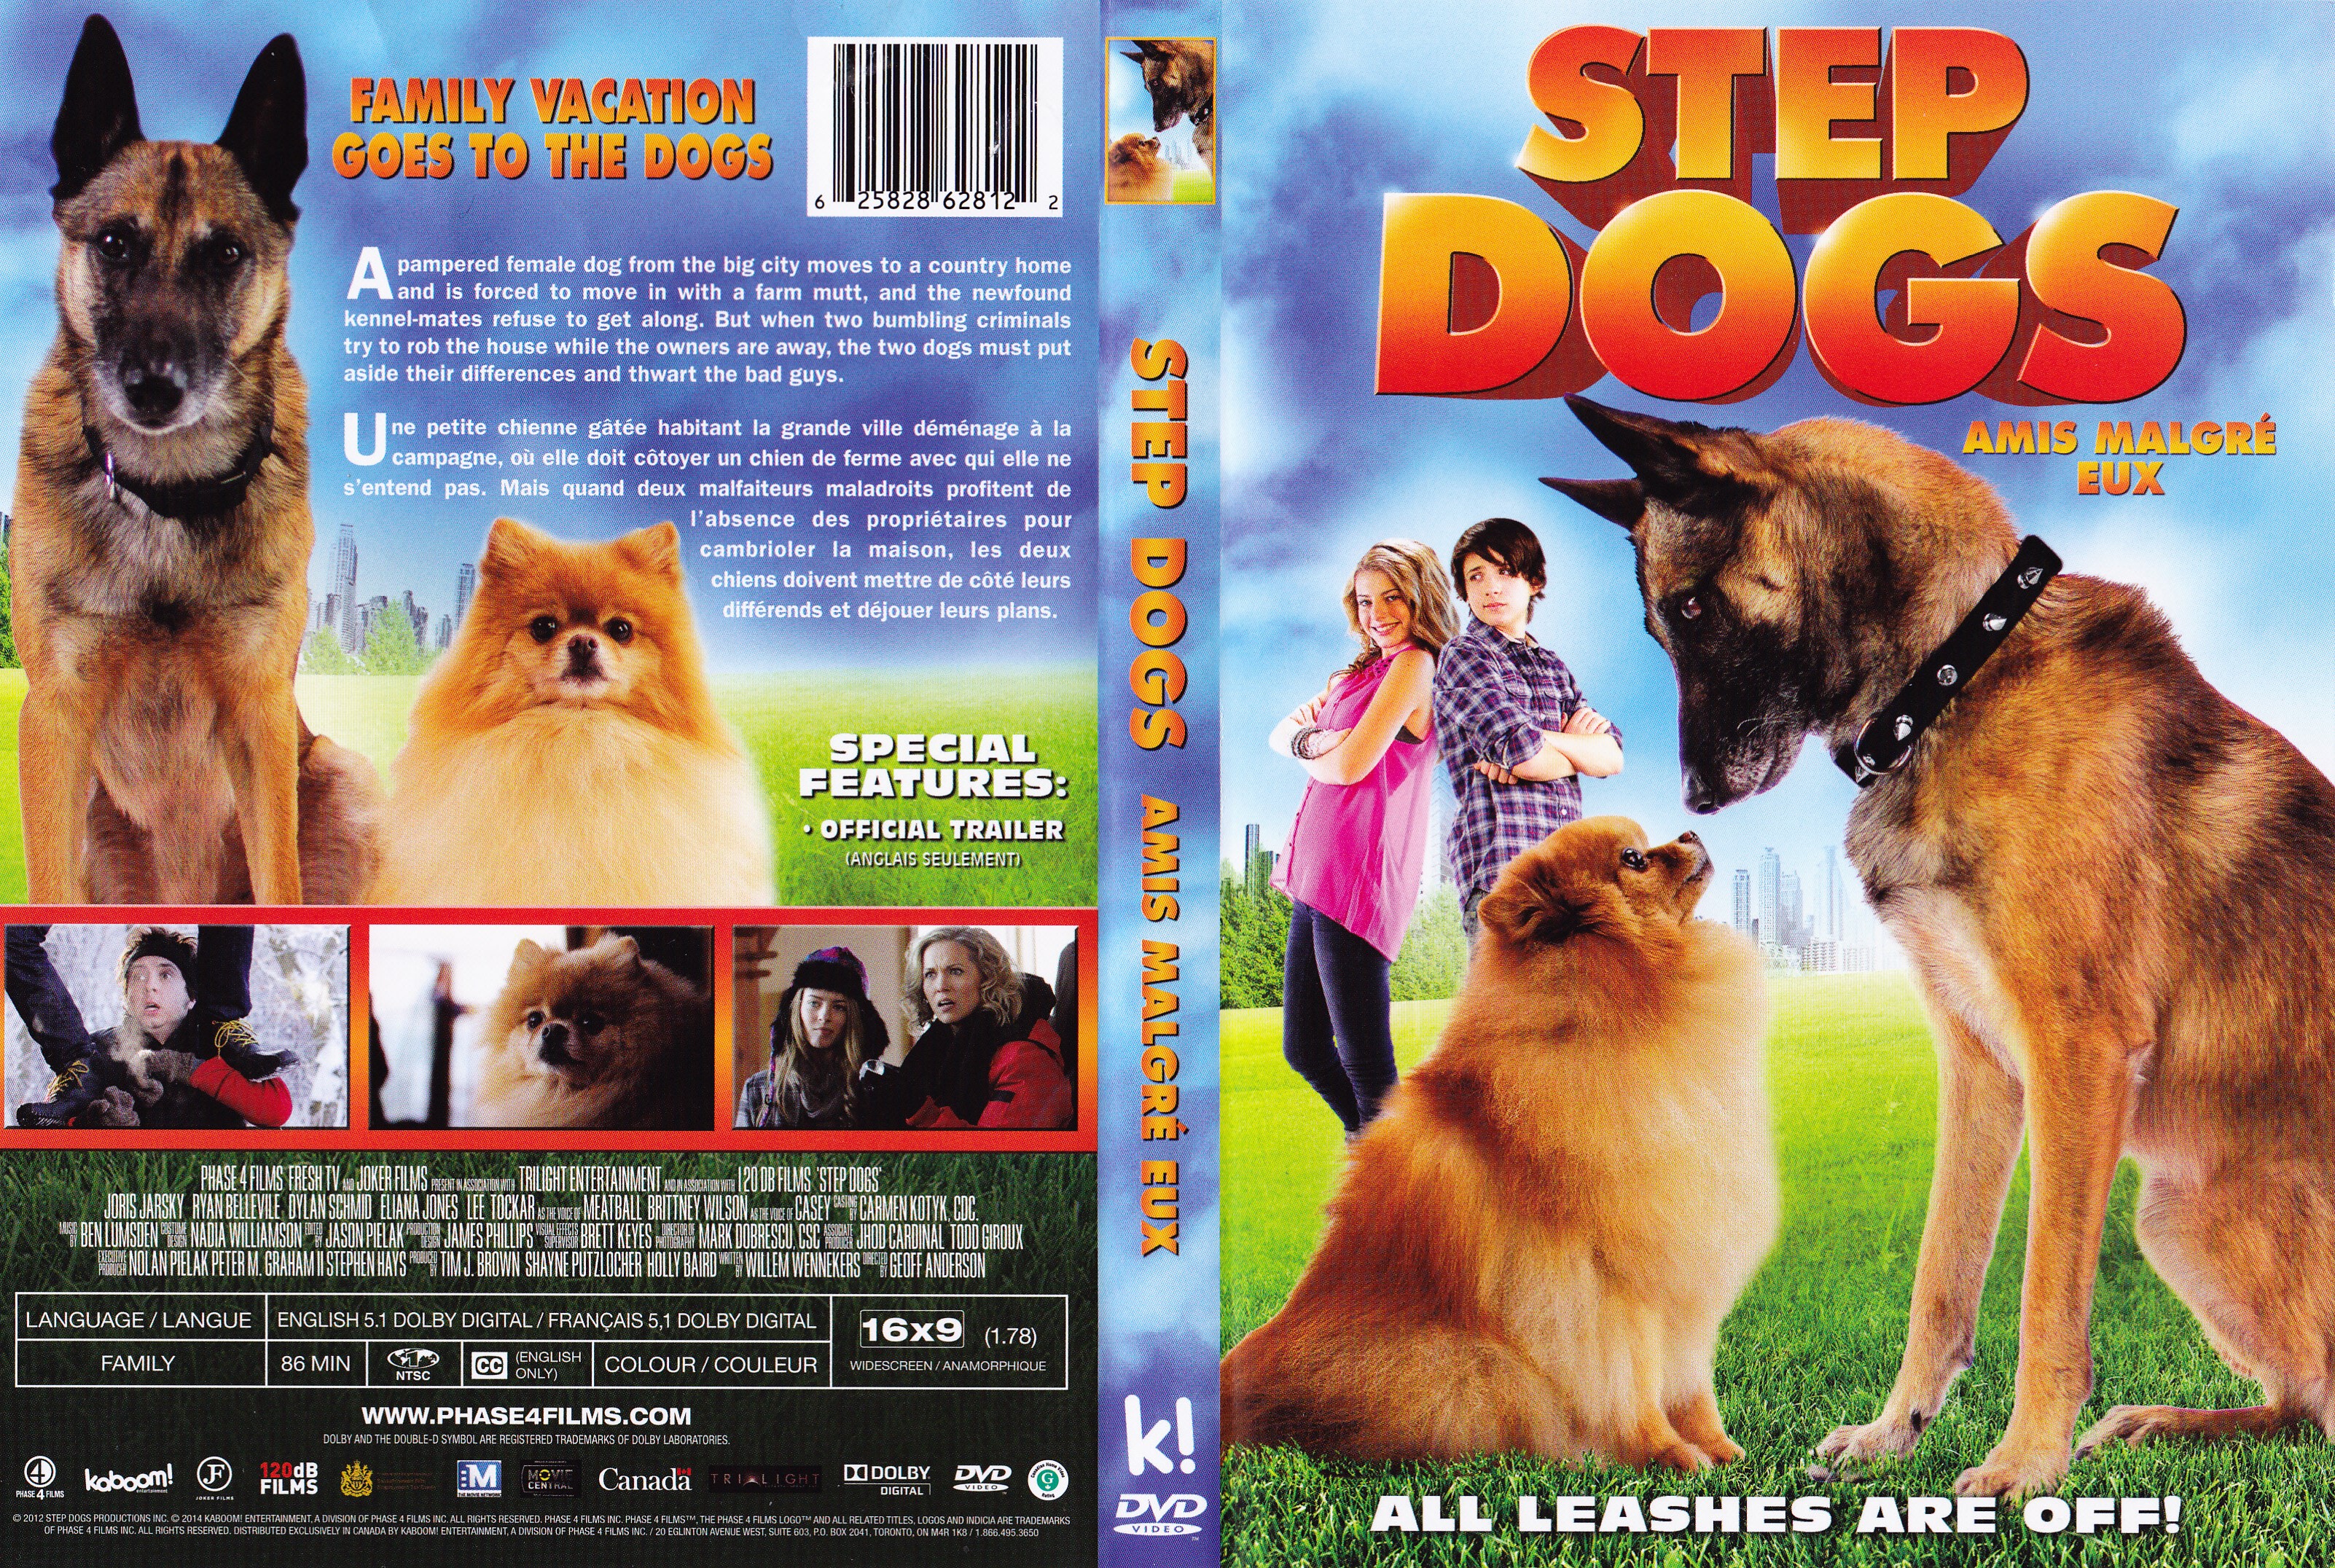 Jaquette DVD Step Dogs - Amis malgr eux (Canadienne)